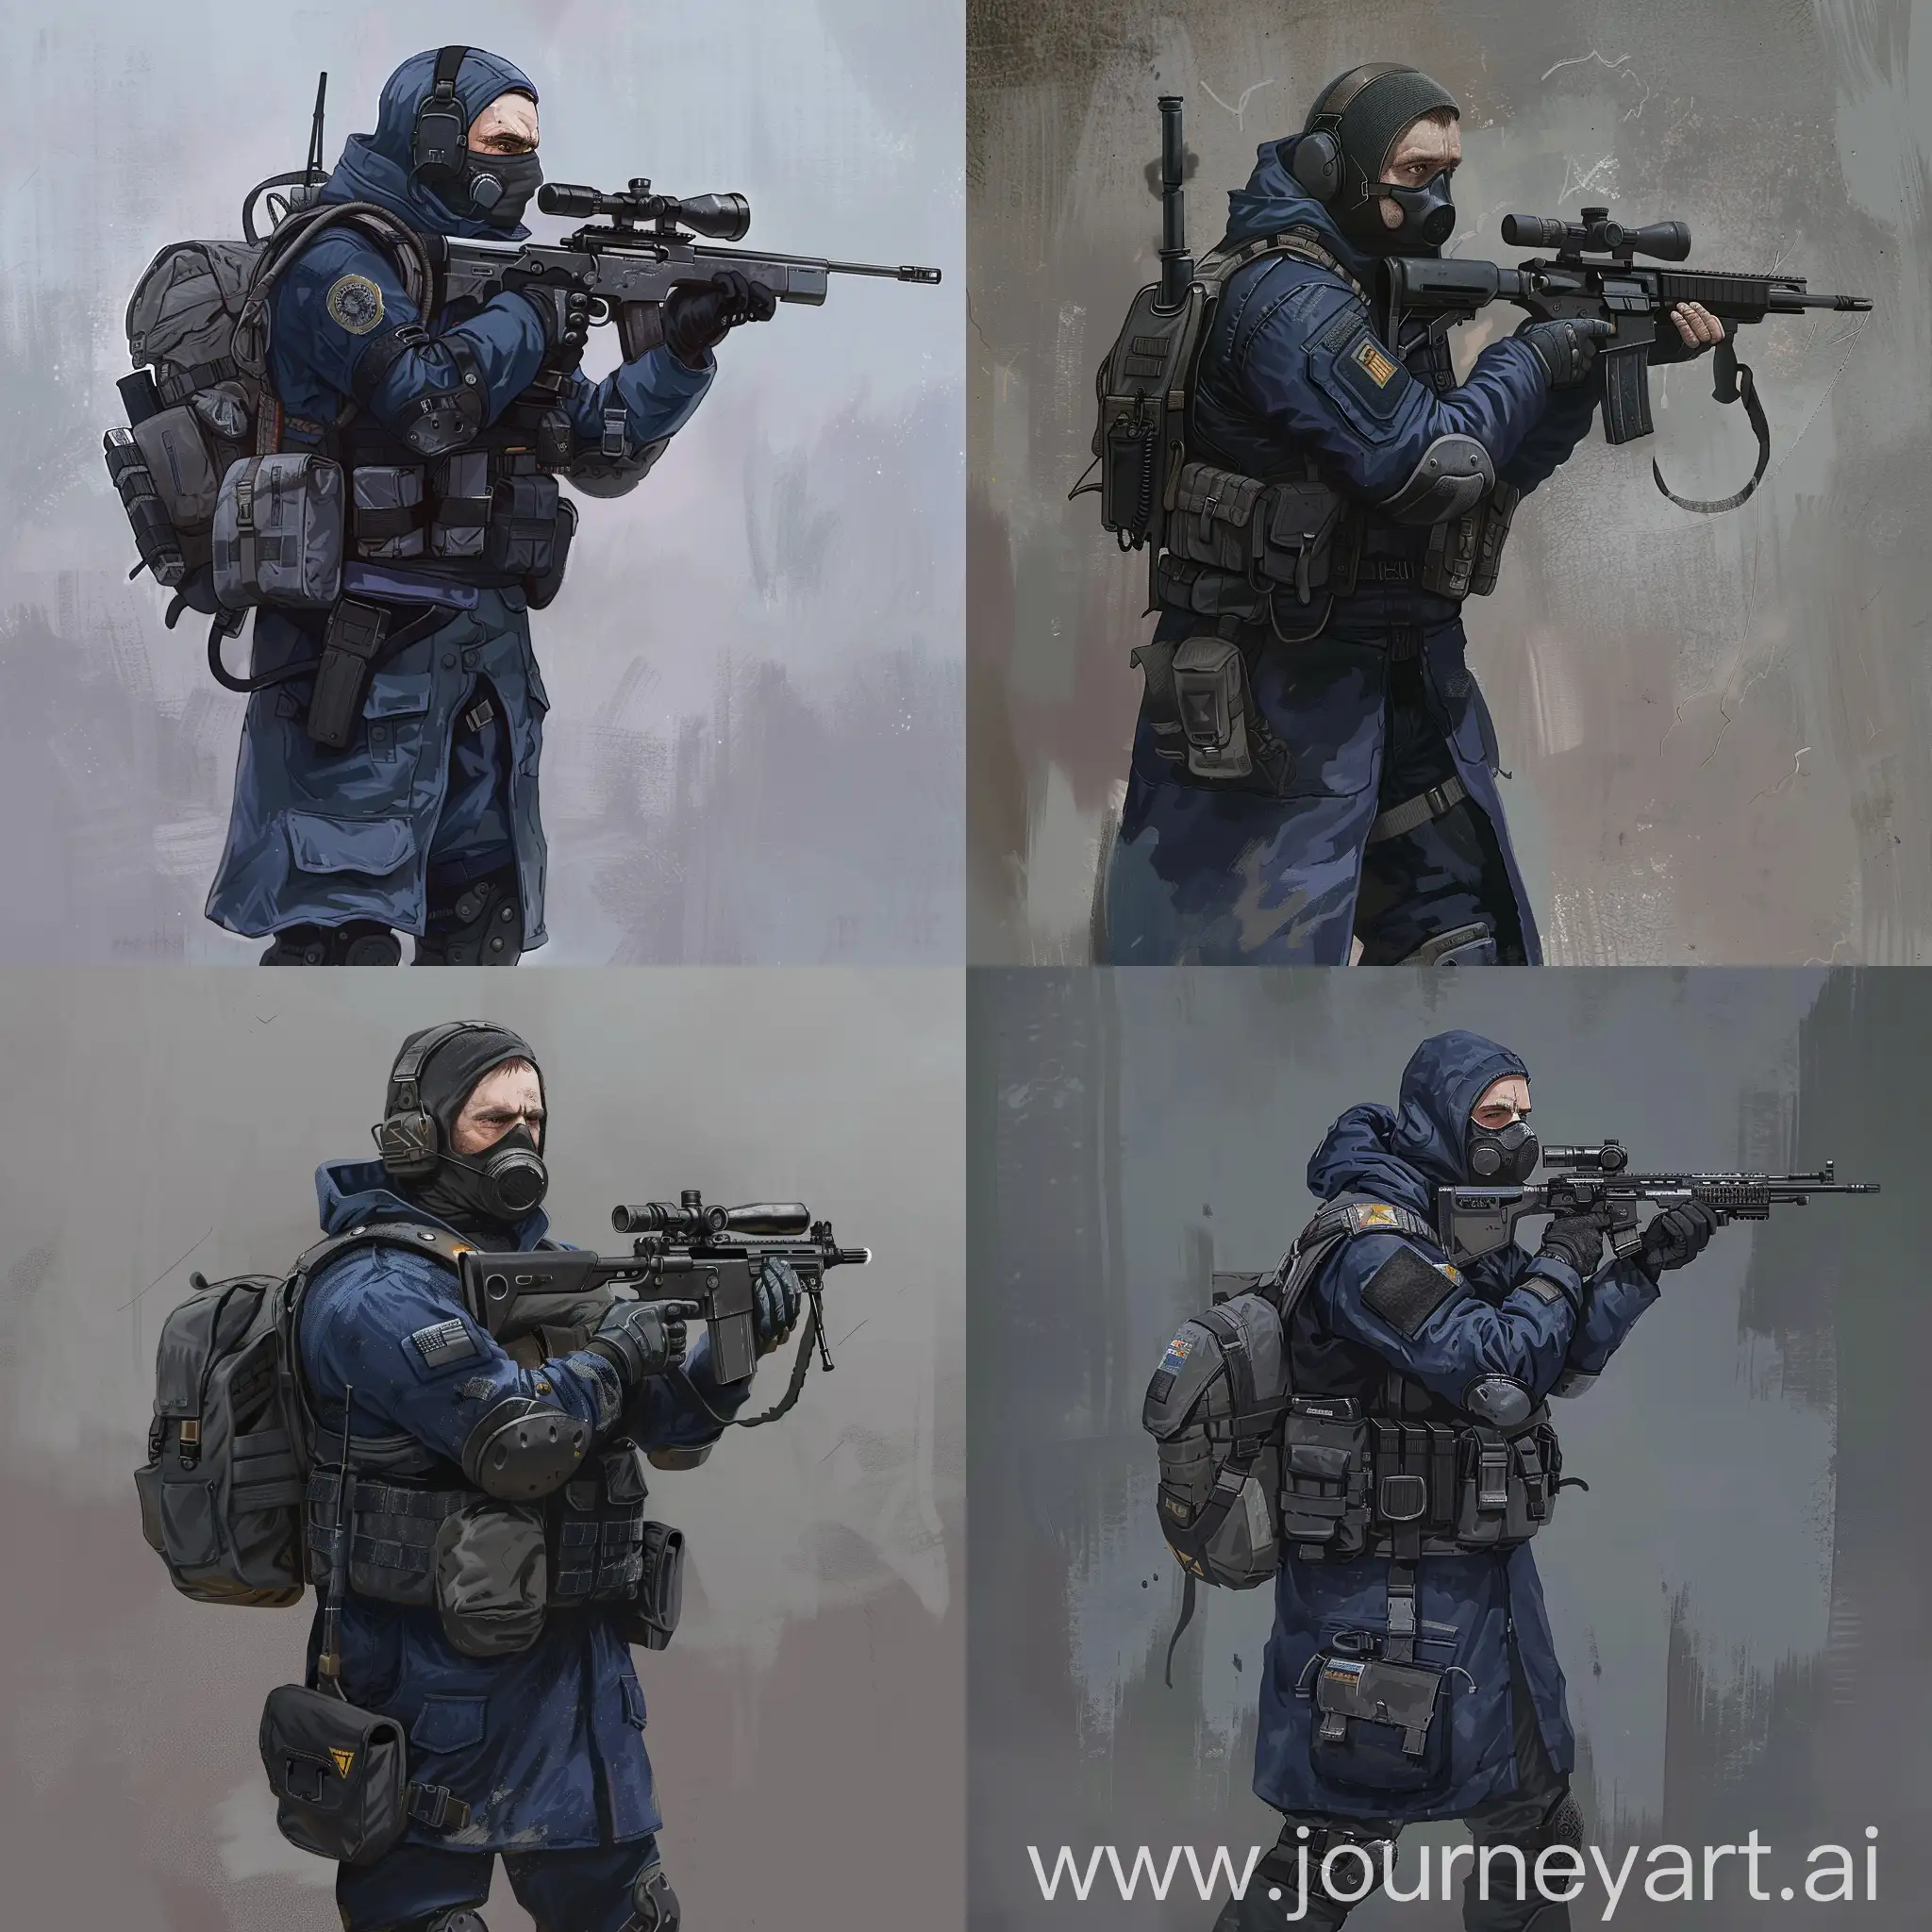 Concept art a mercenary from the universe of S.T.A.L.K.E.R., a mercenary dressed in a dark blue military raincoat, gray military armor on his body, a respirator mask on his face, a small military backpack on his back, sniper rifle in his hands.